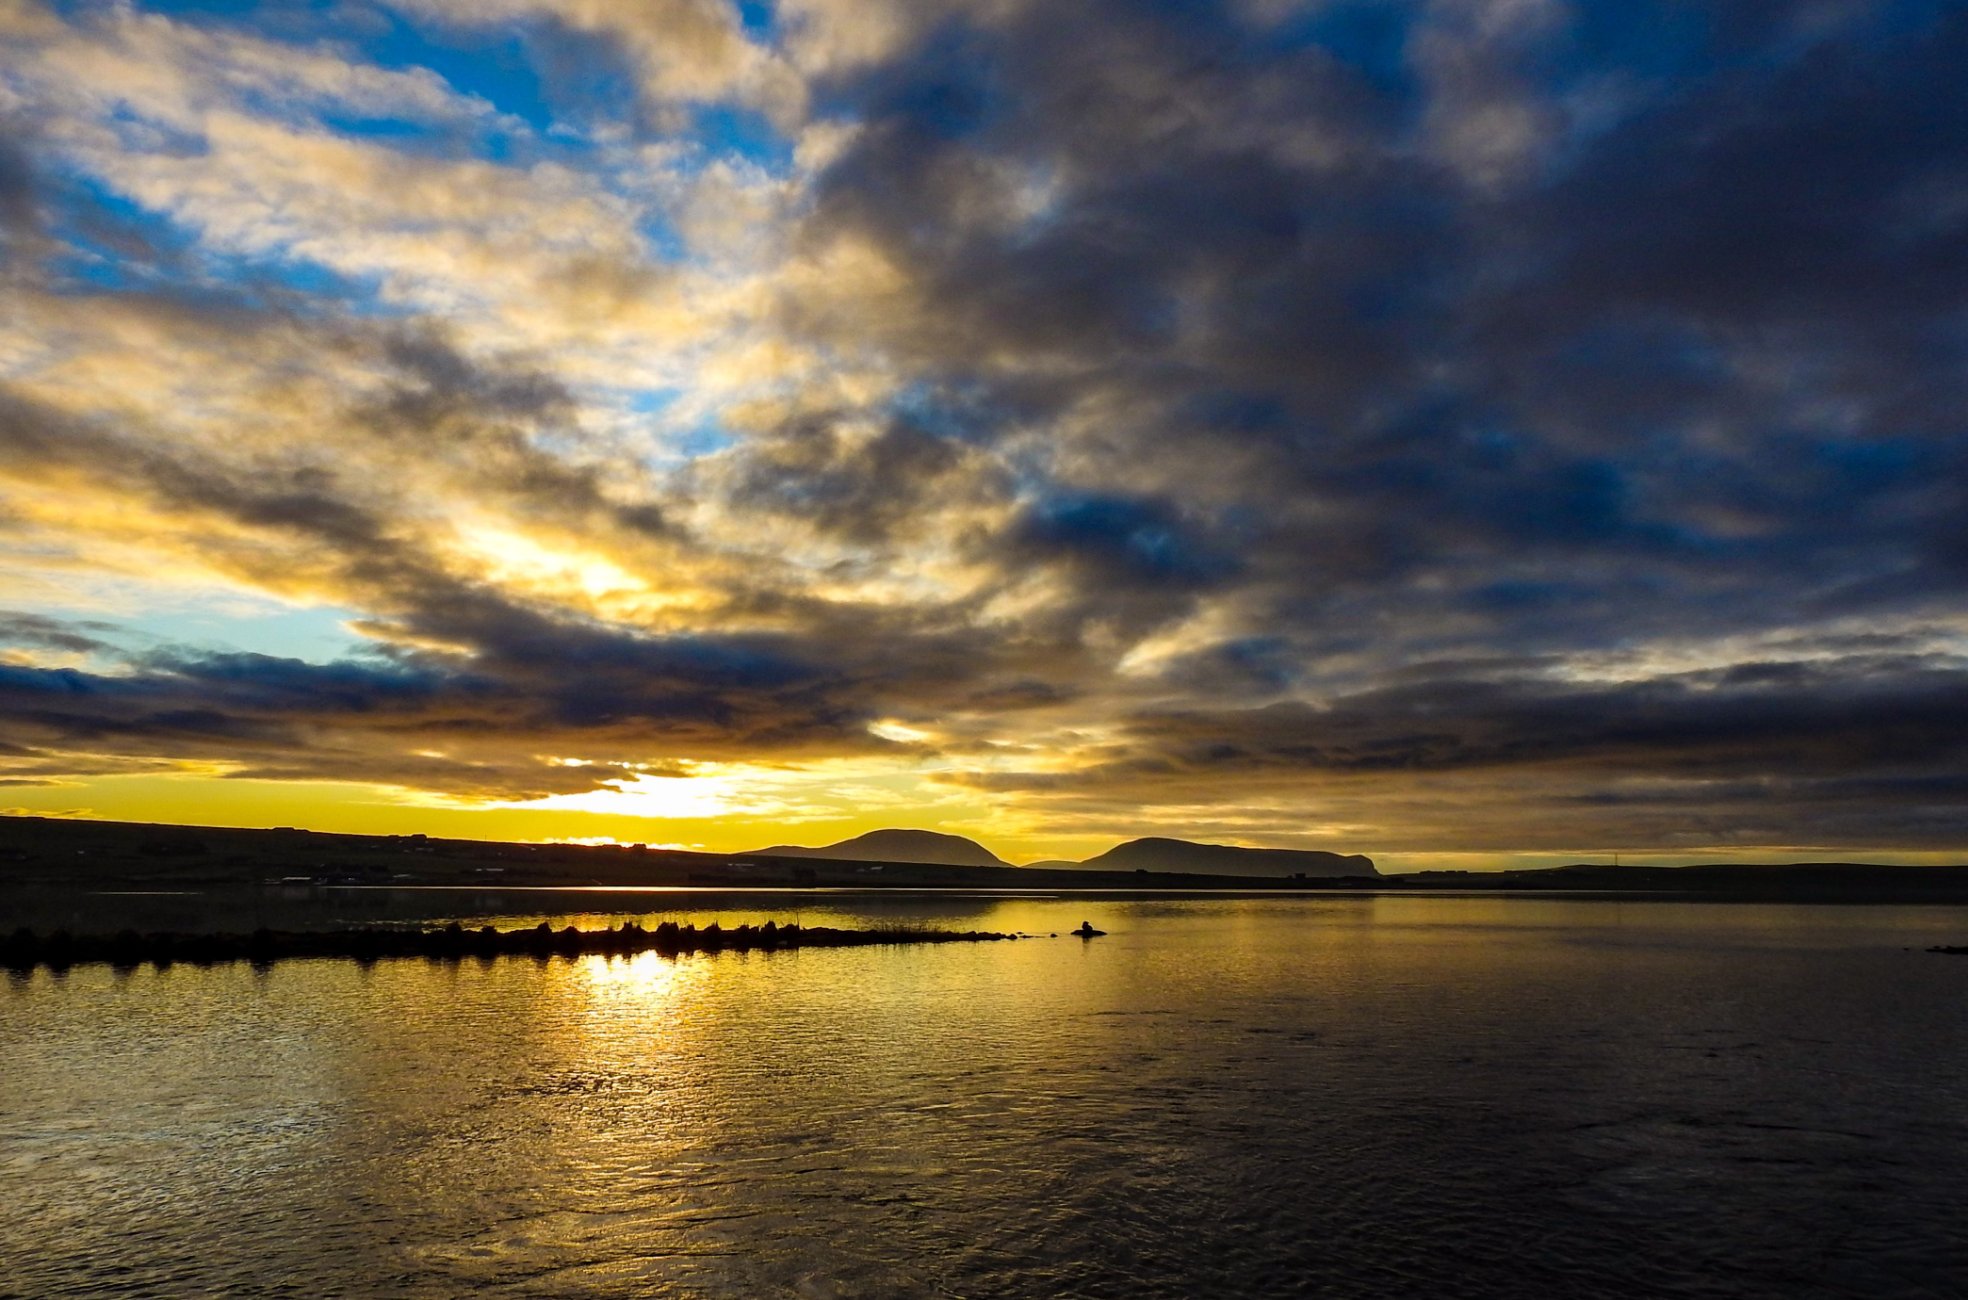 Sunset over the Stenness Loch in Orkney - image by Scott Oxford